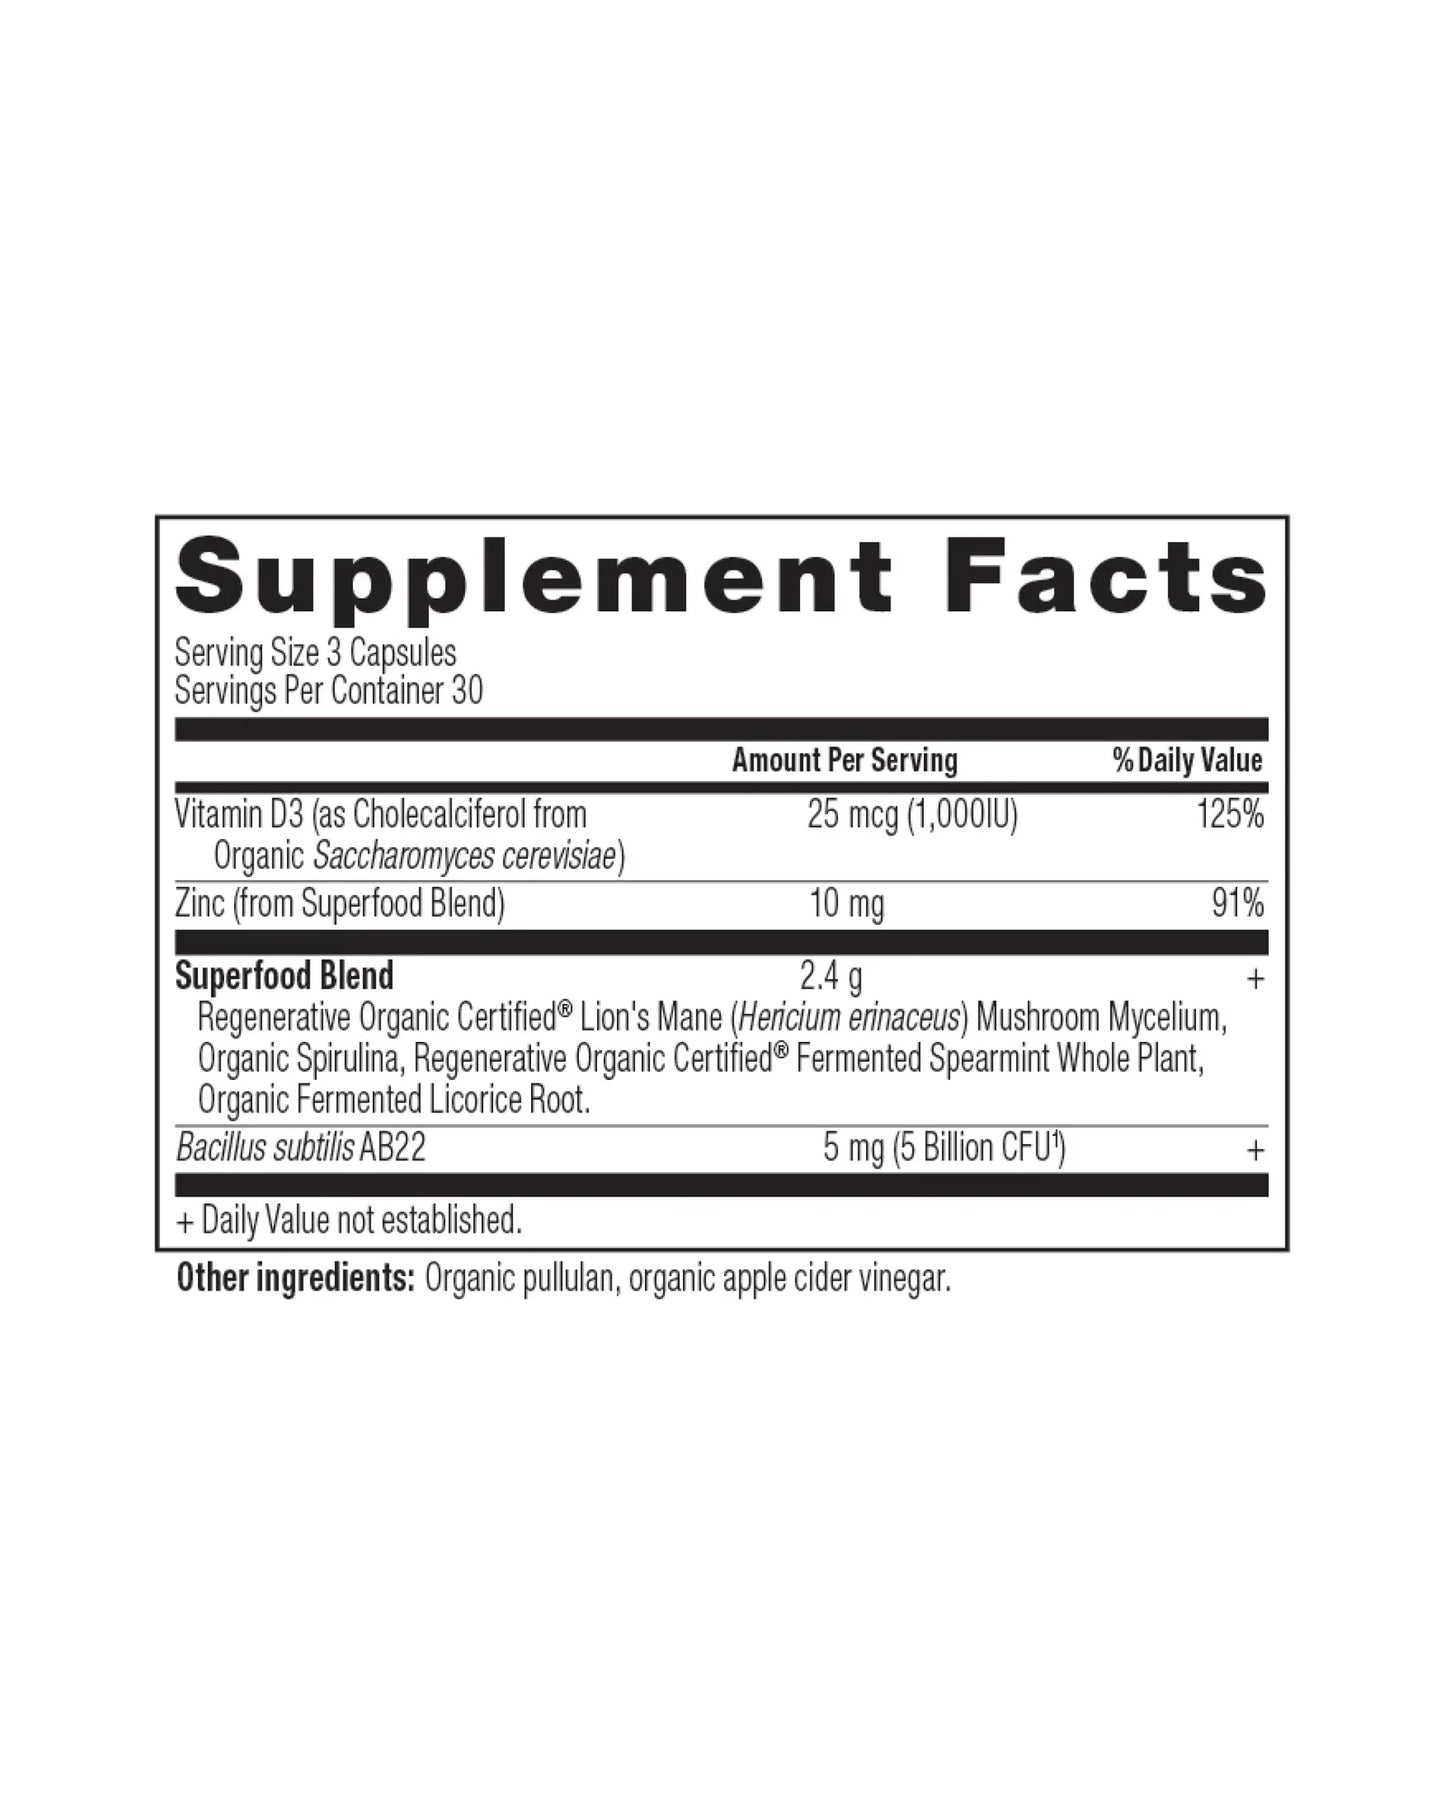 Regenerative Organic Certified™ Leaky Gut Support Capsules